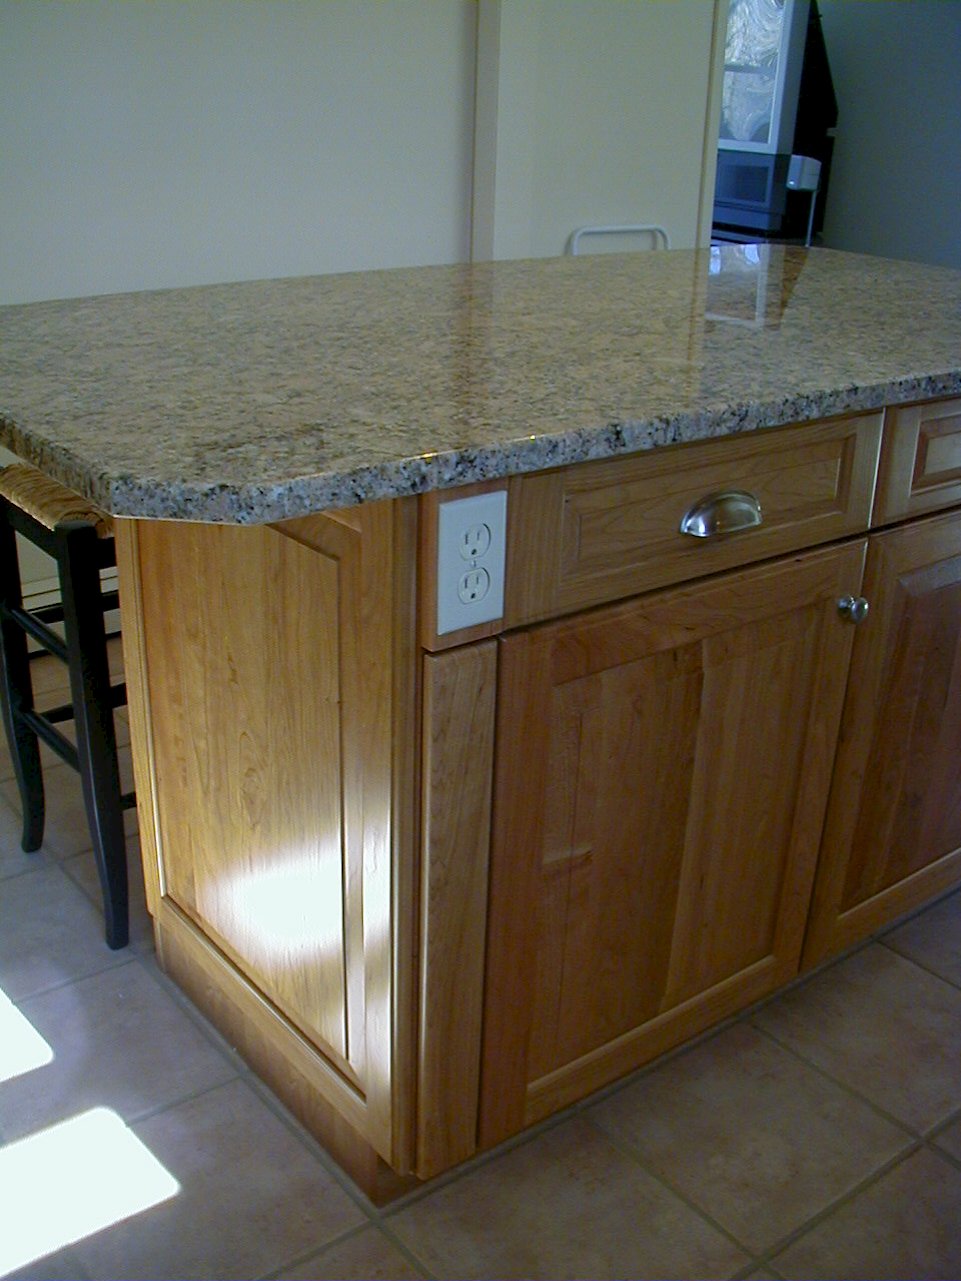 An outlet integrated into the kitchen island.